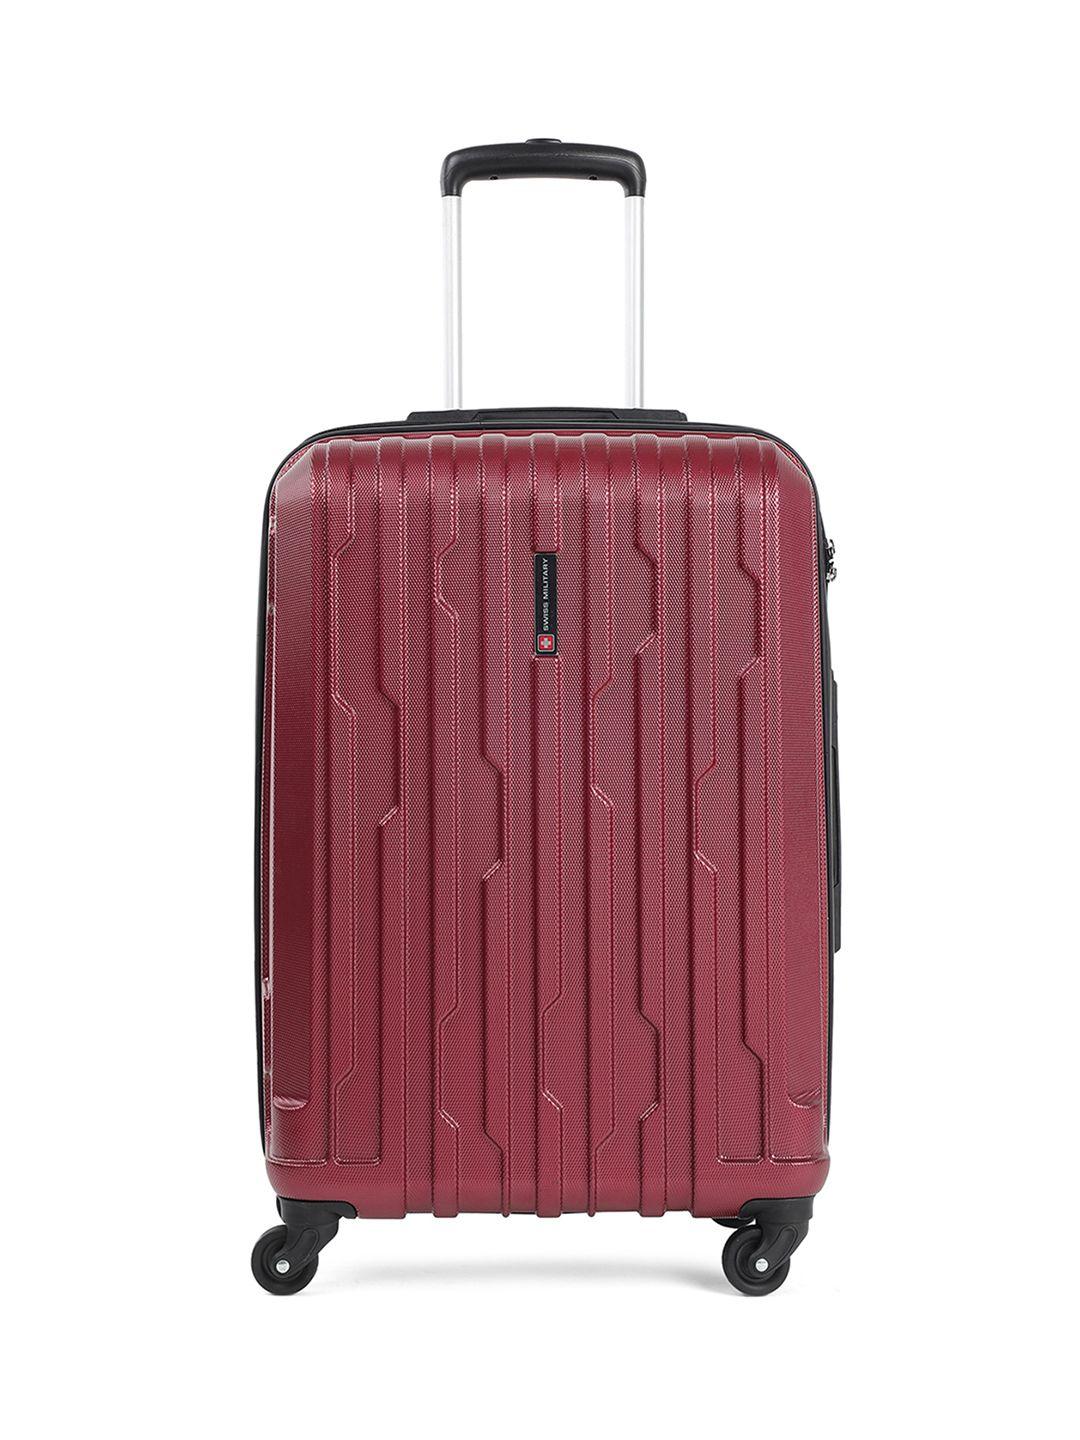 swiss military textured hard-sided cabin trolley suitcase